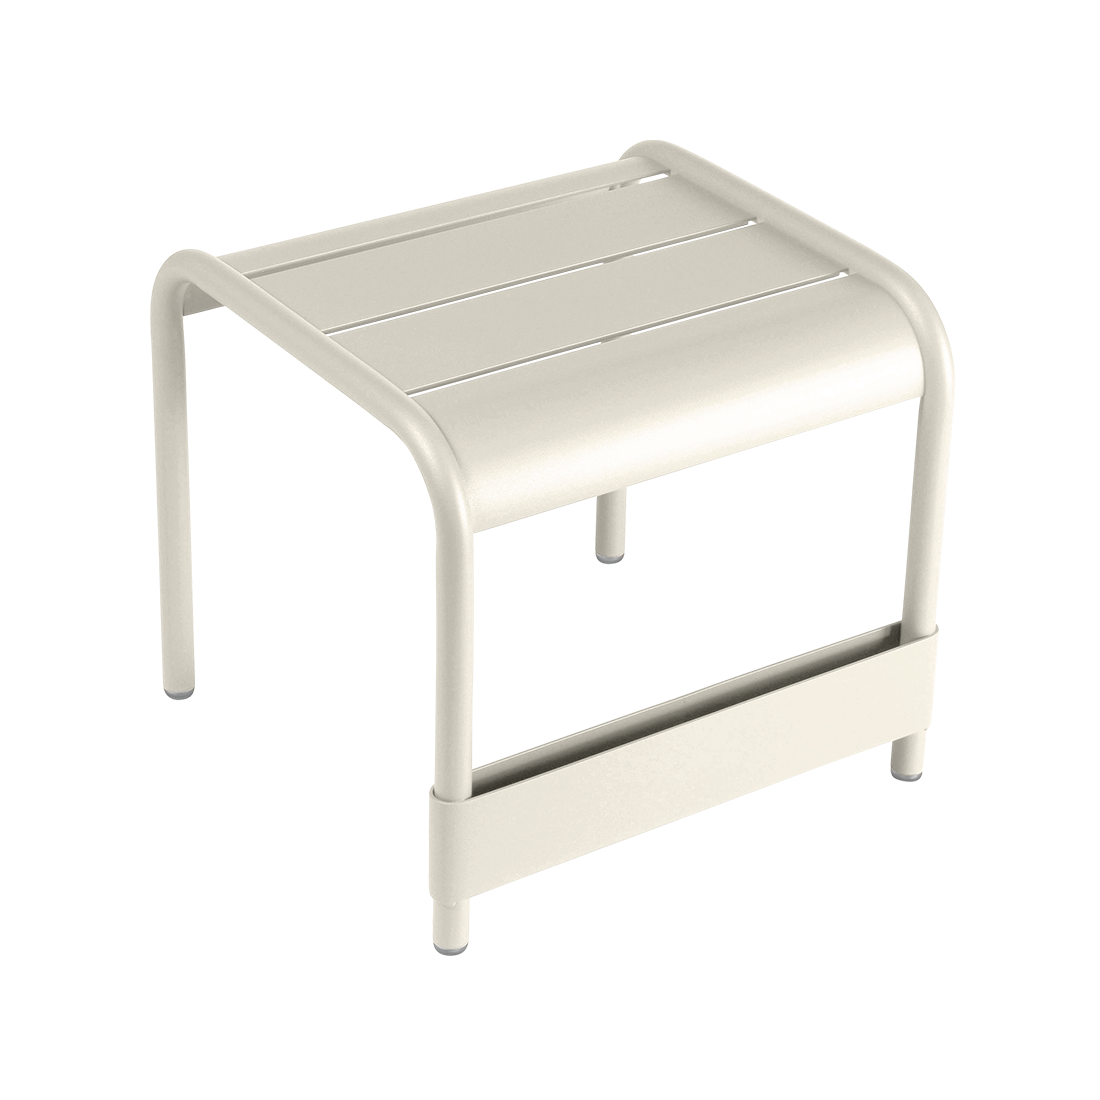 Luxembourg Footrest/Small Low Table